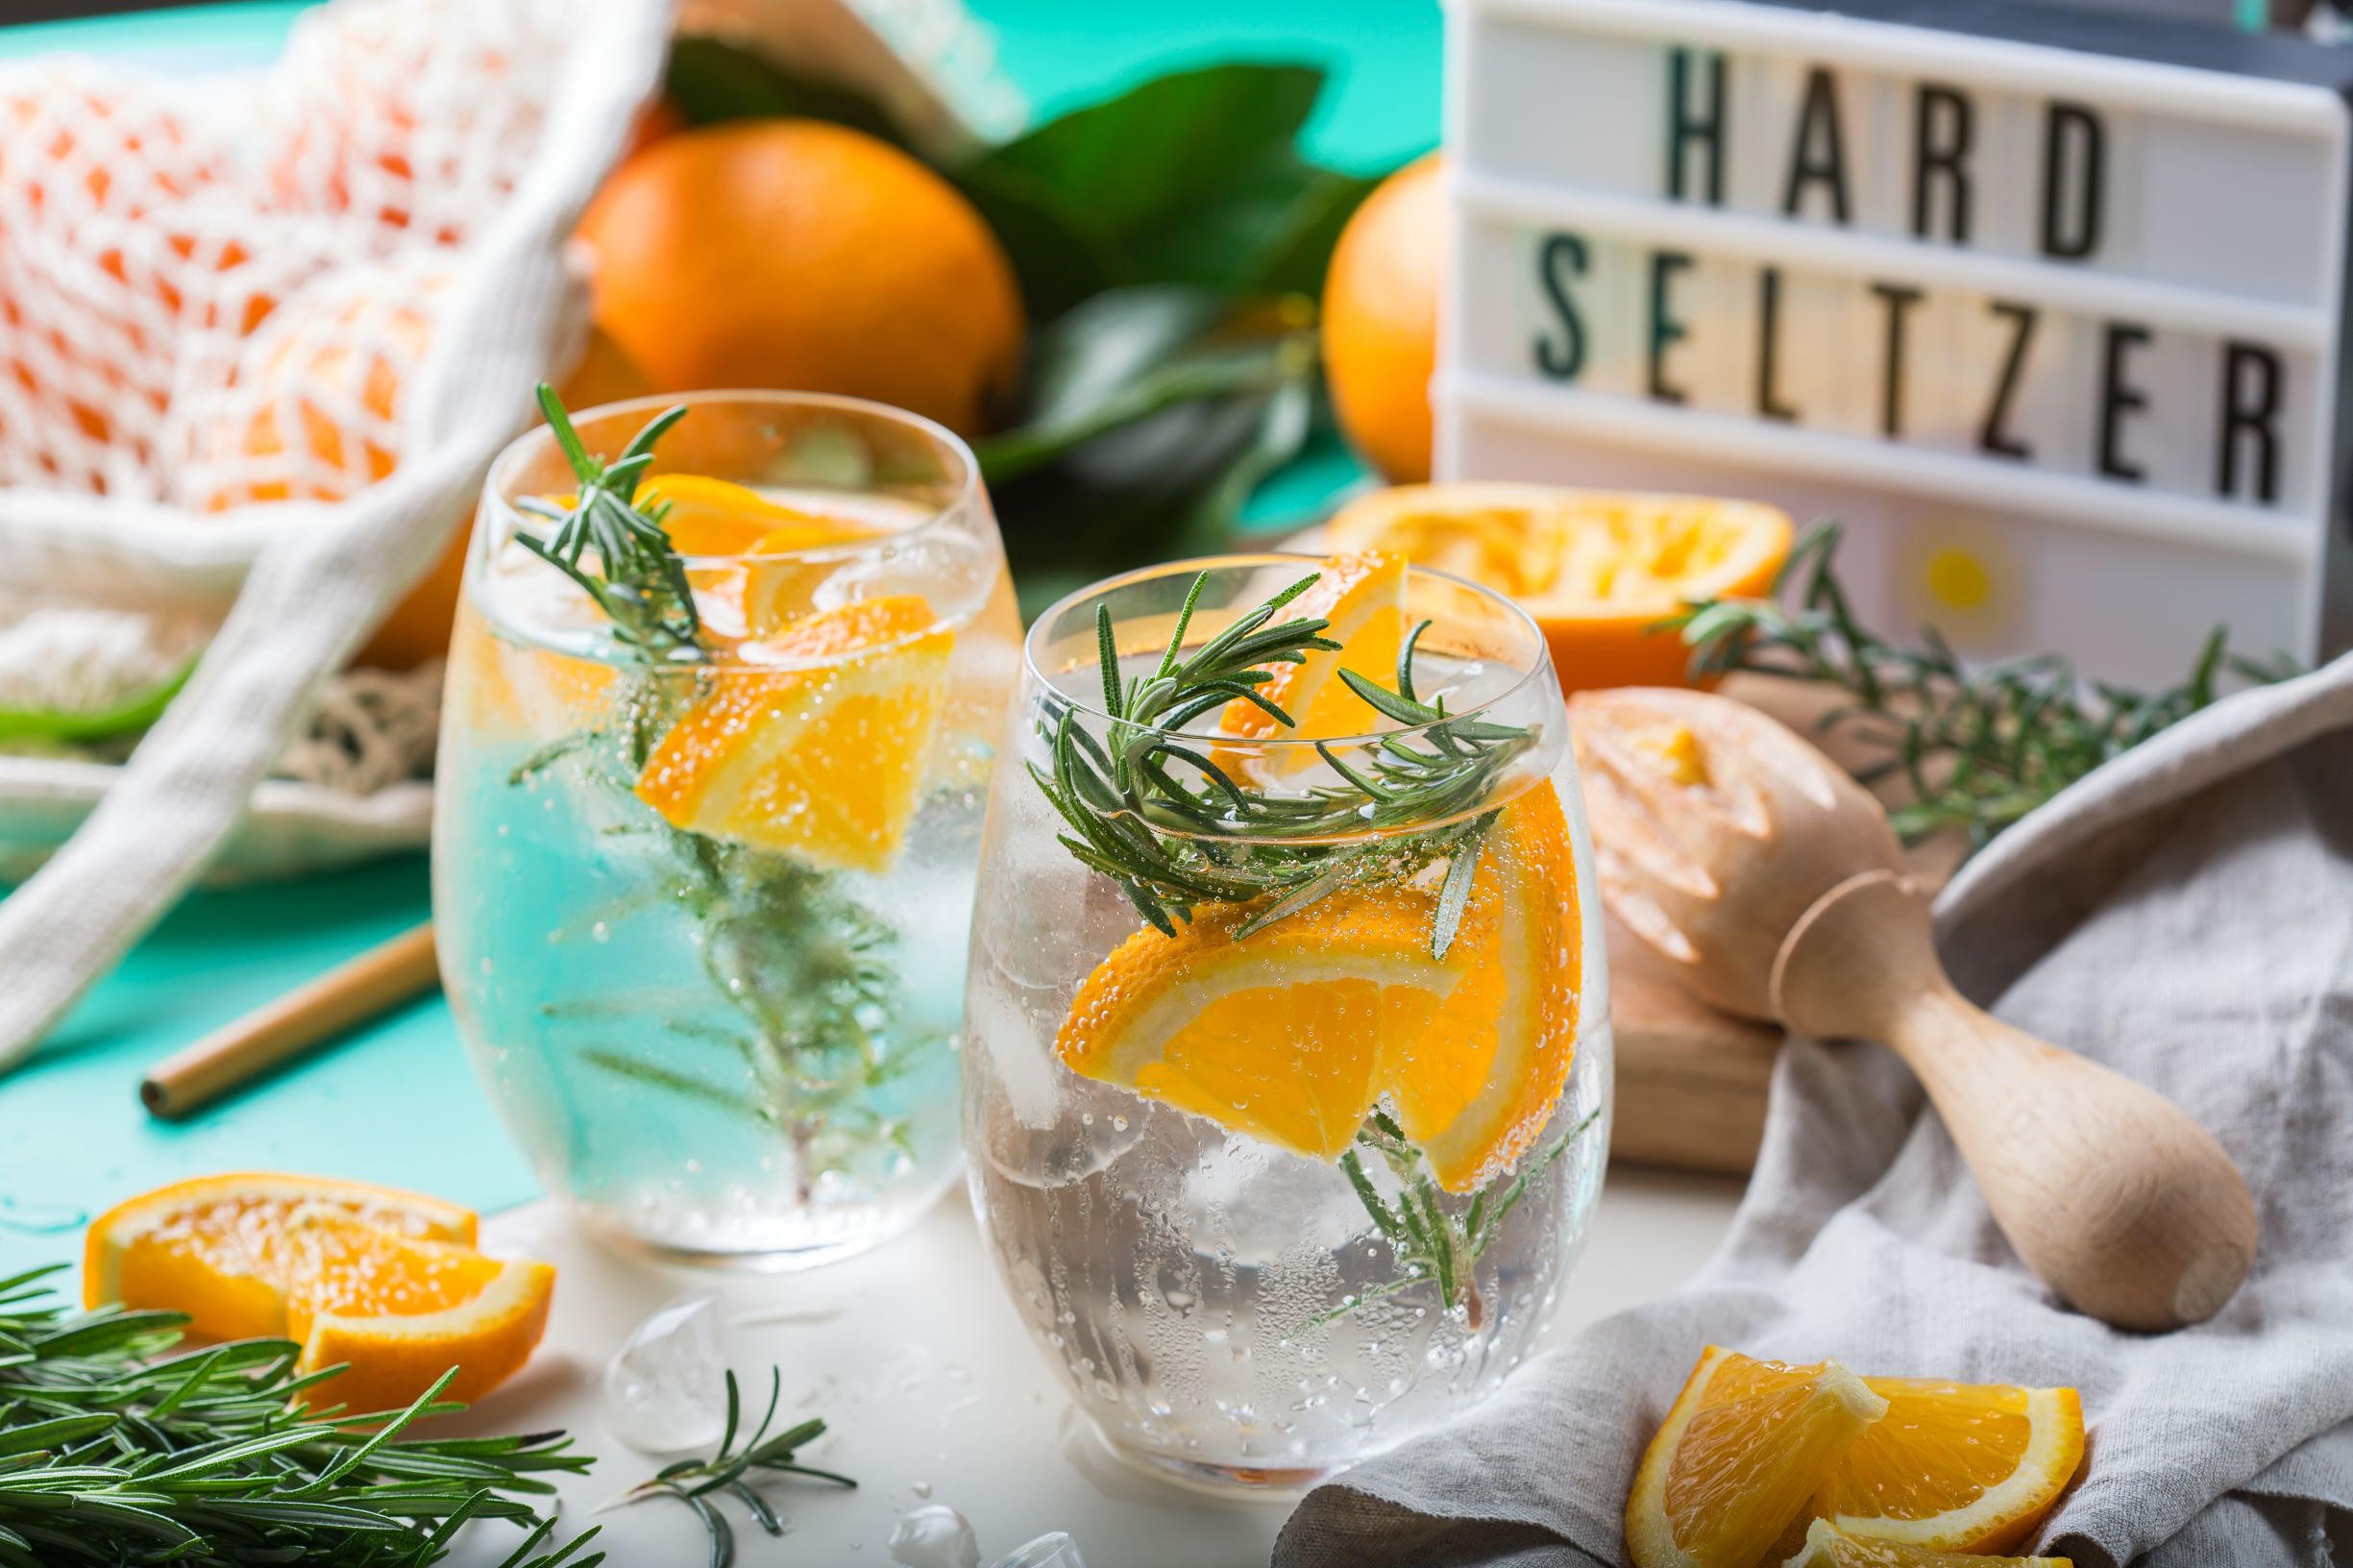 How to tap into the hard seltzer trend Food & Drink Speciality Food